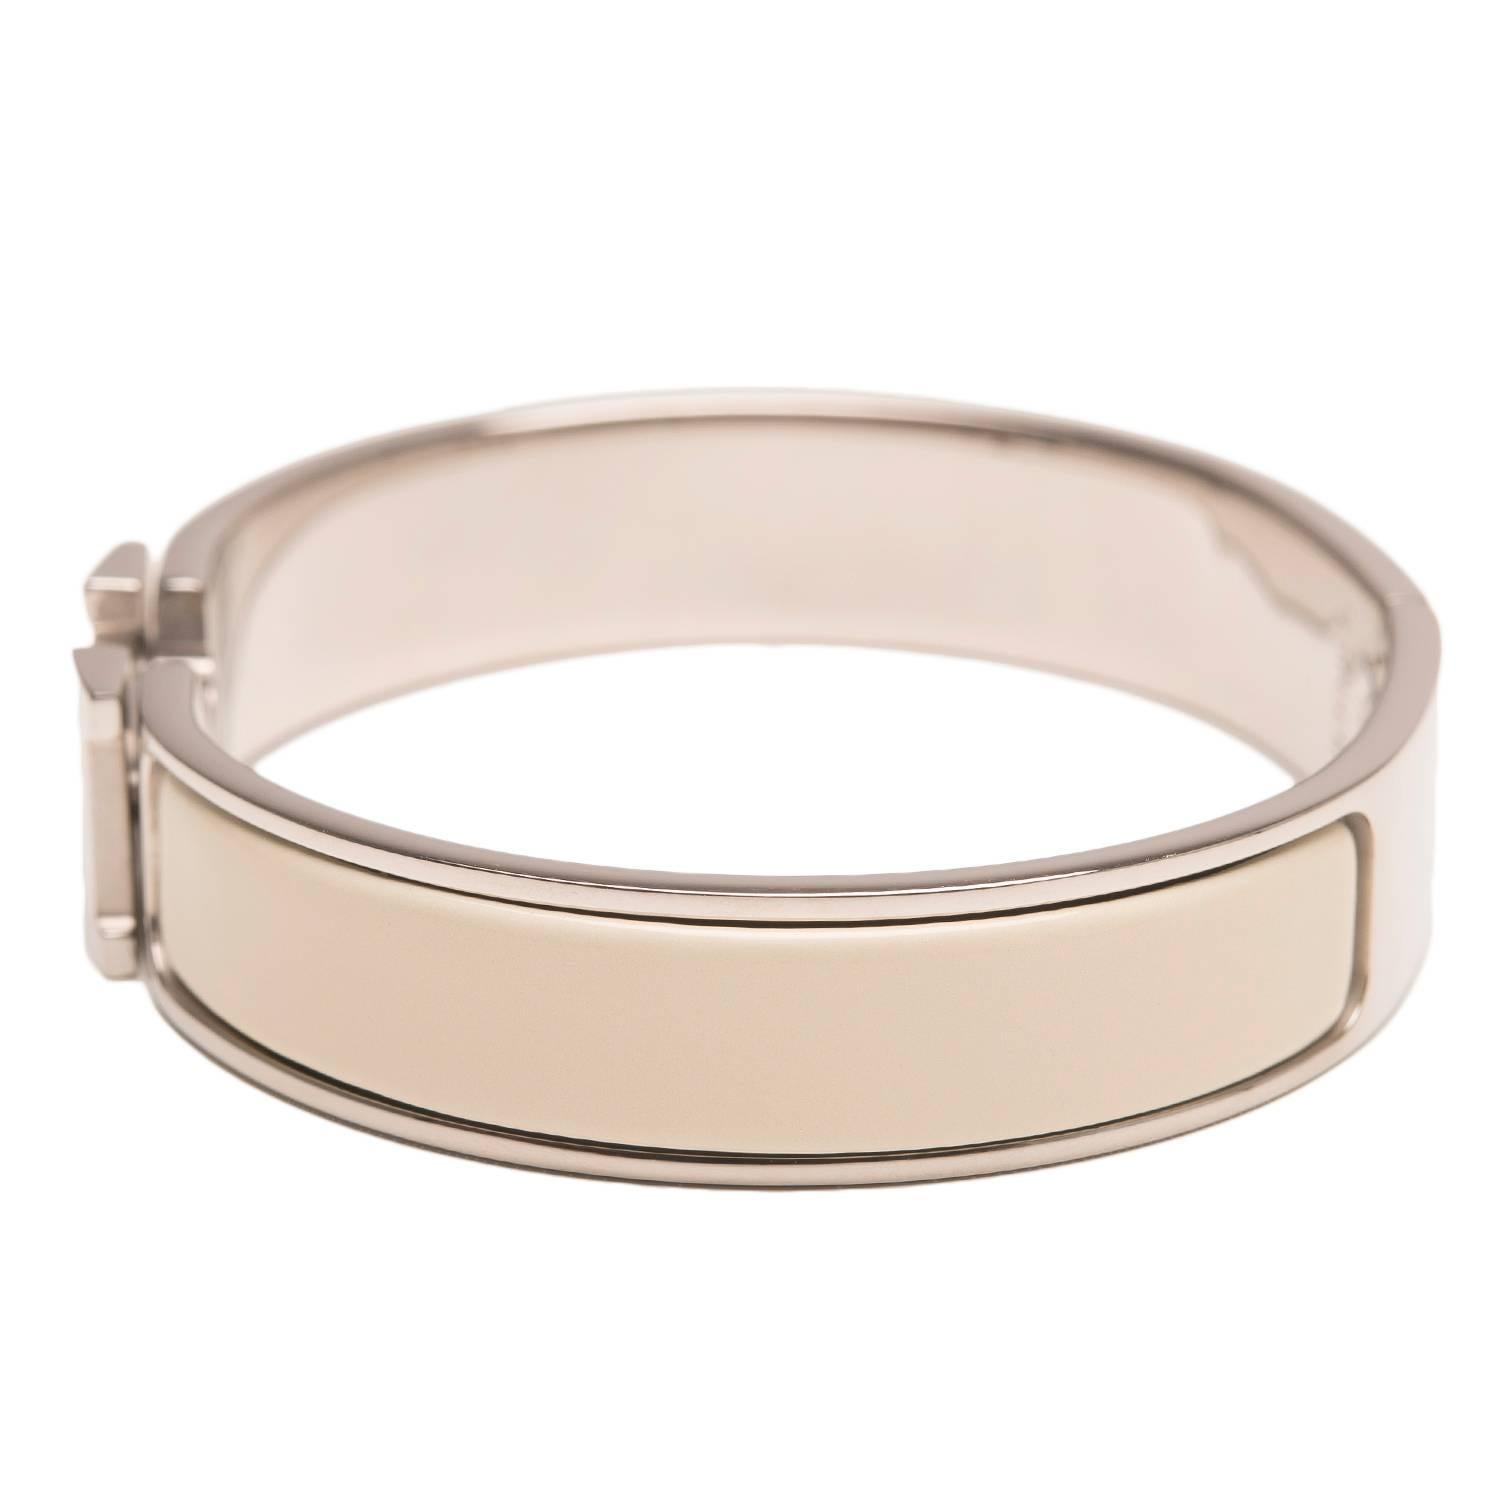 Hermes wide Clic Clac H bracelet in Craie enamel with palladium plated hardware in size PM.

Origin: France

Condition: Never Carried

Accompanied by: Hermes box, Caretag

Measurements: Diameter: 2.25